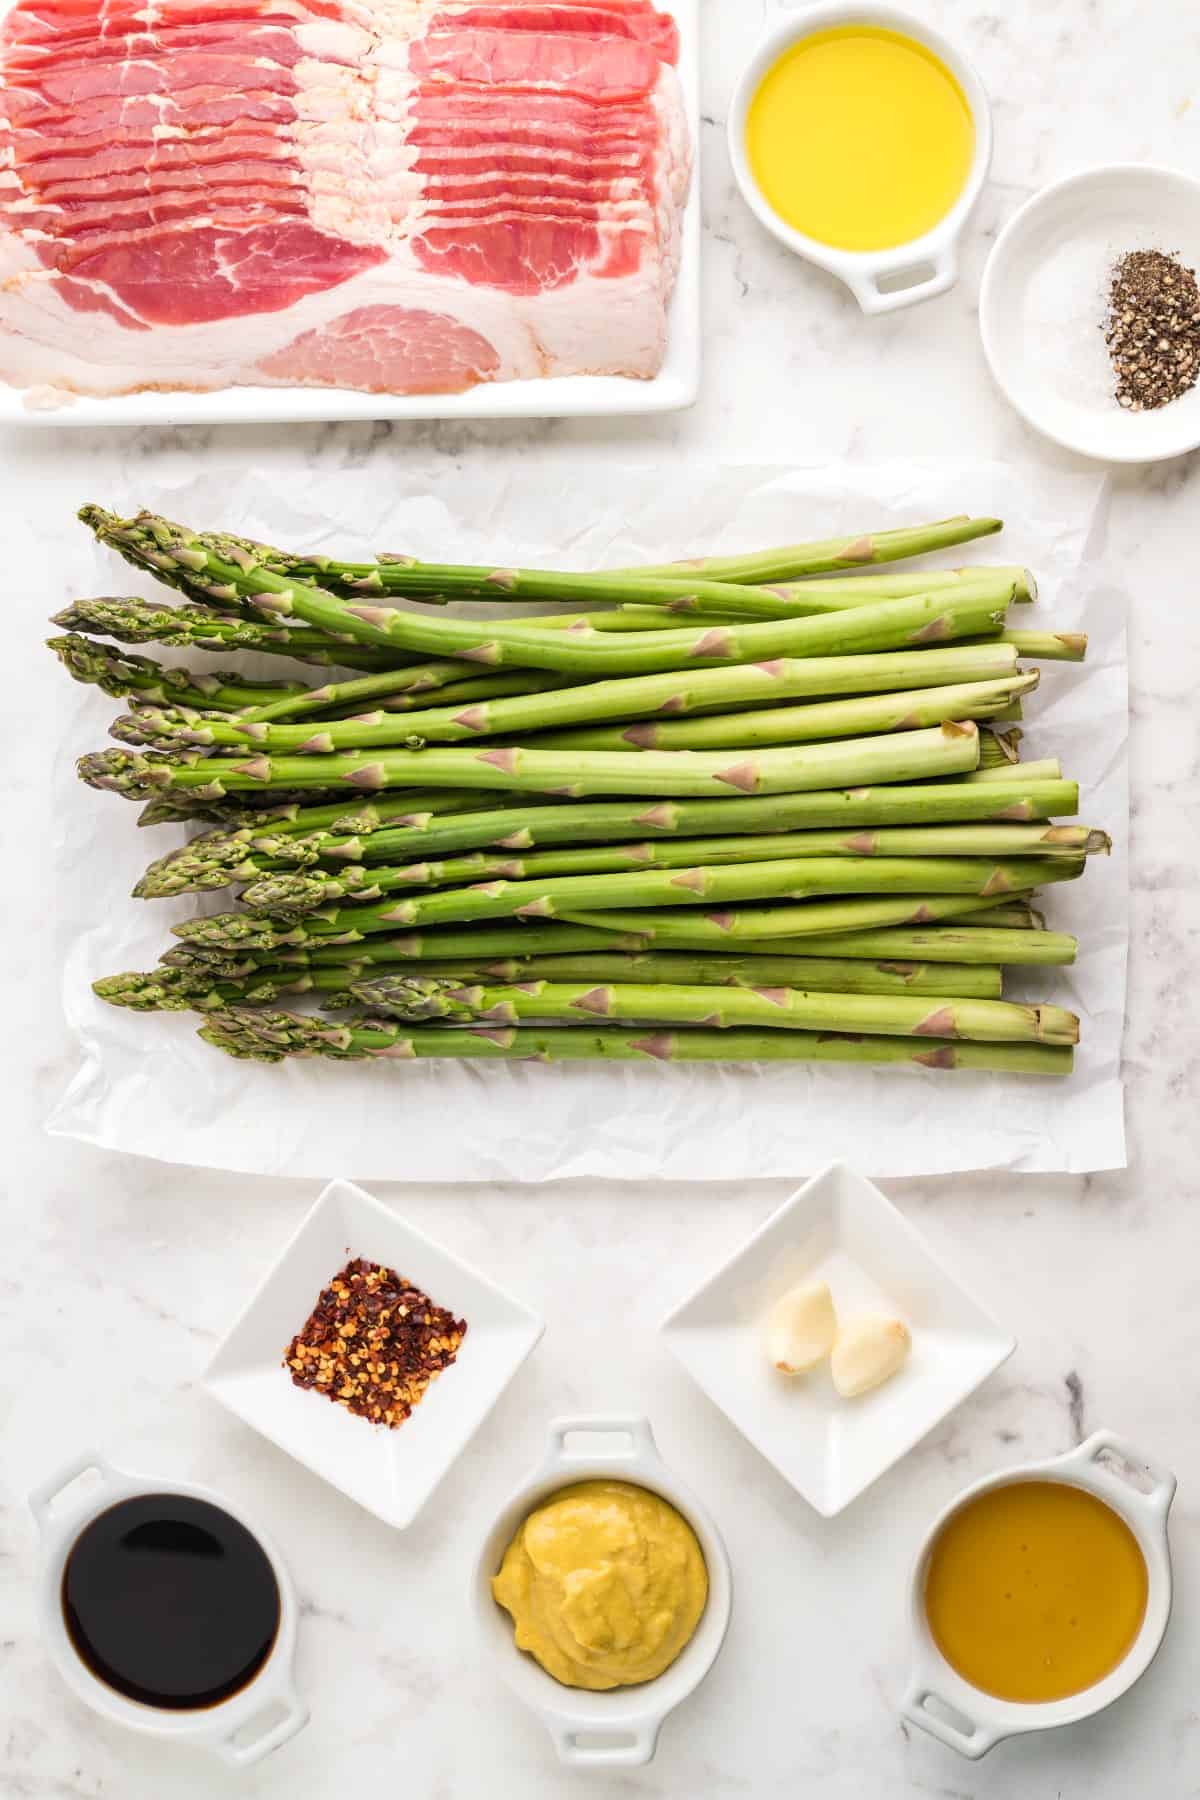 Ingredients for Bacon Wrapped Asparagus